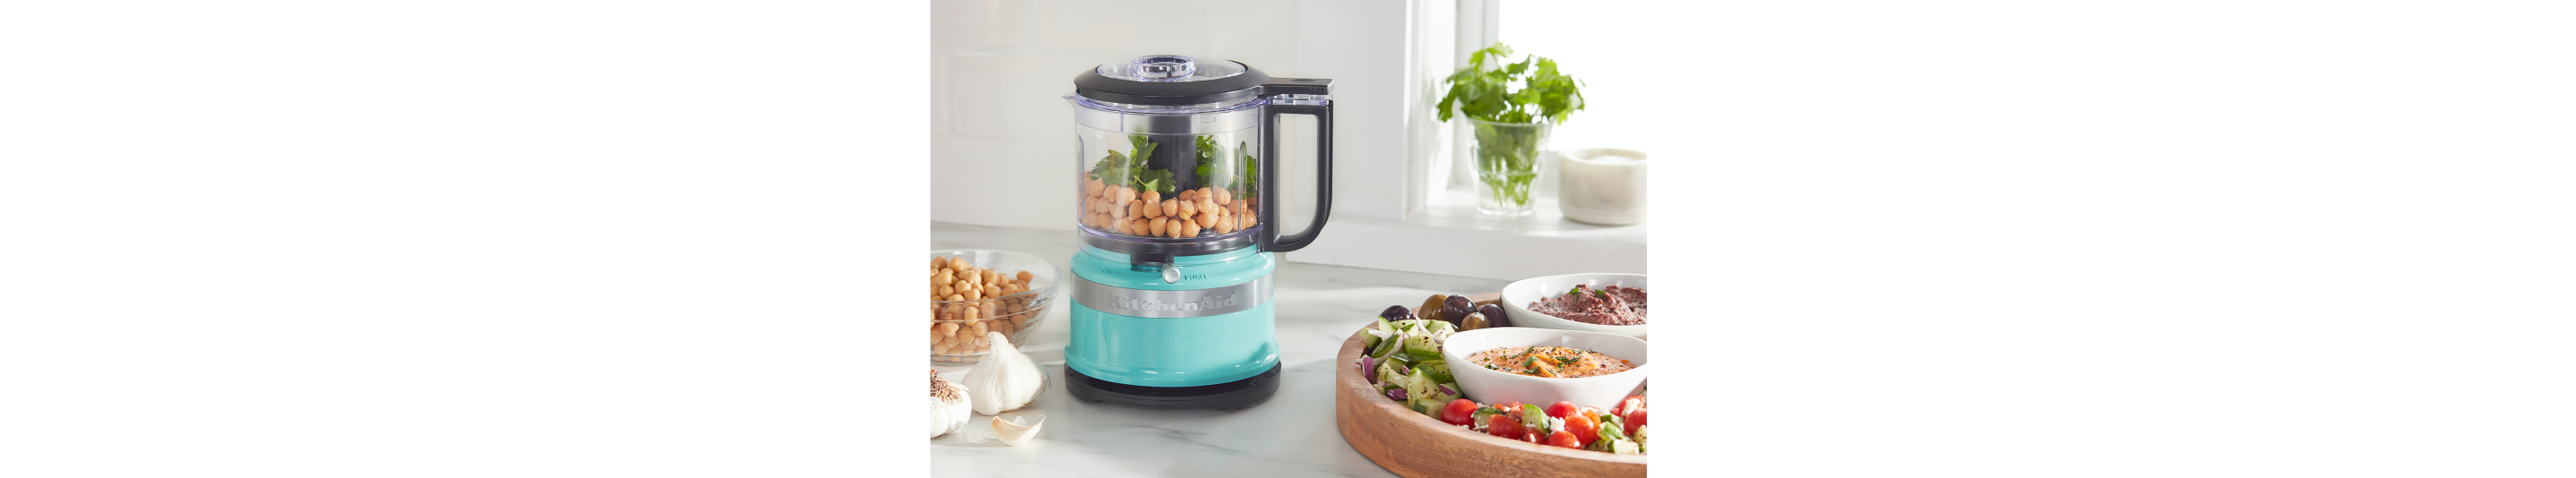 https://kitchenaid-h.assetsadobe.com/is/image/content/dam/business-unit/kitchenaid/en-us/marketing-content/site-assets/page-content/blog/gifts-for-a-cook/gifts-for-a-cook-21.jpg?fit=constrain&fmt=png-alpha&wid=2875